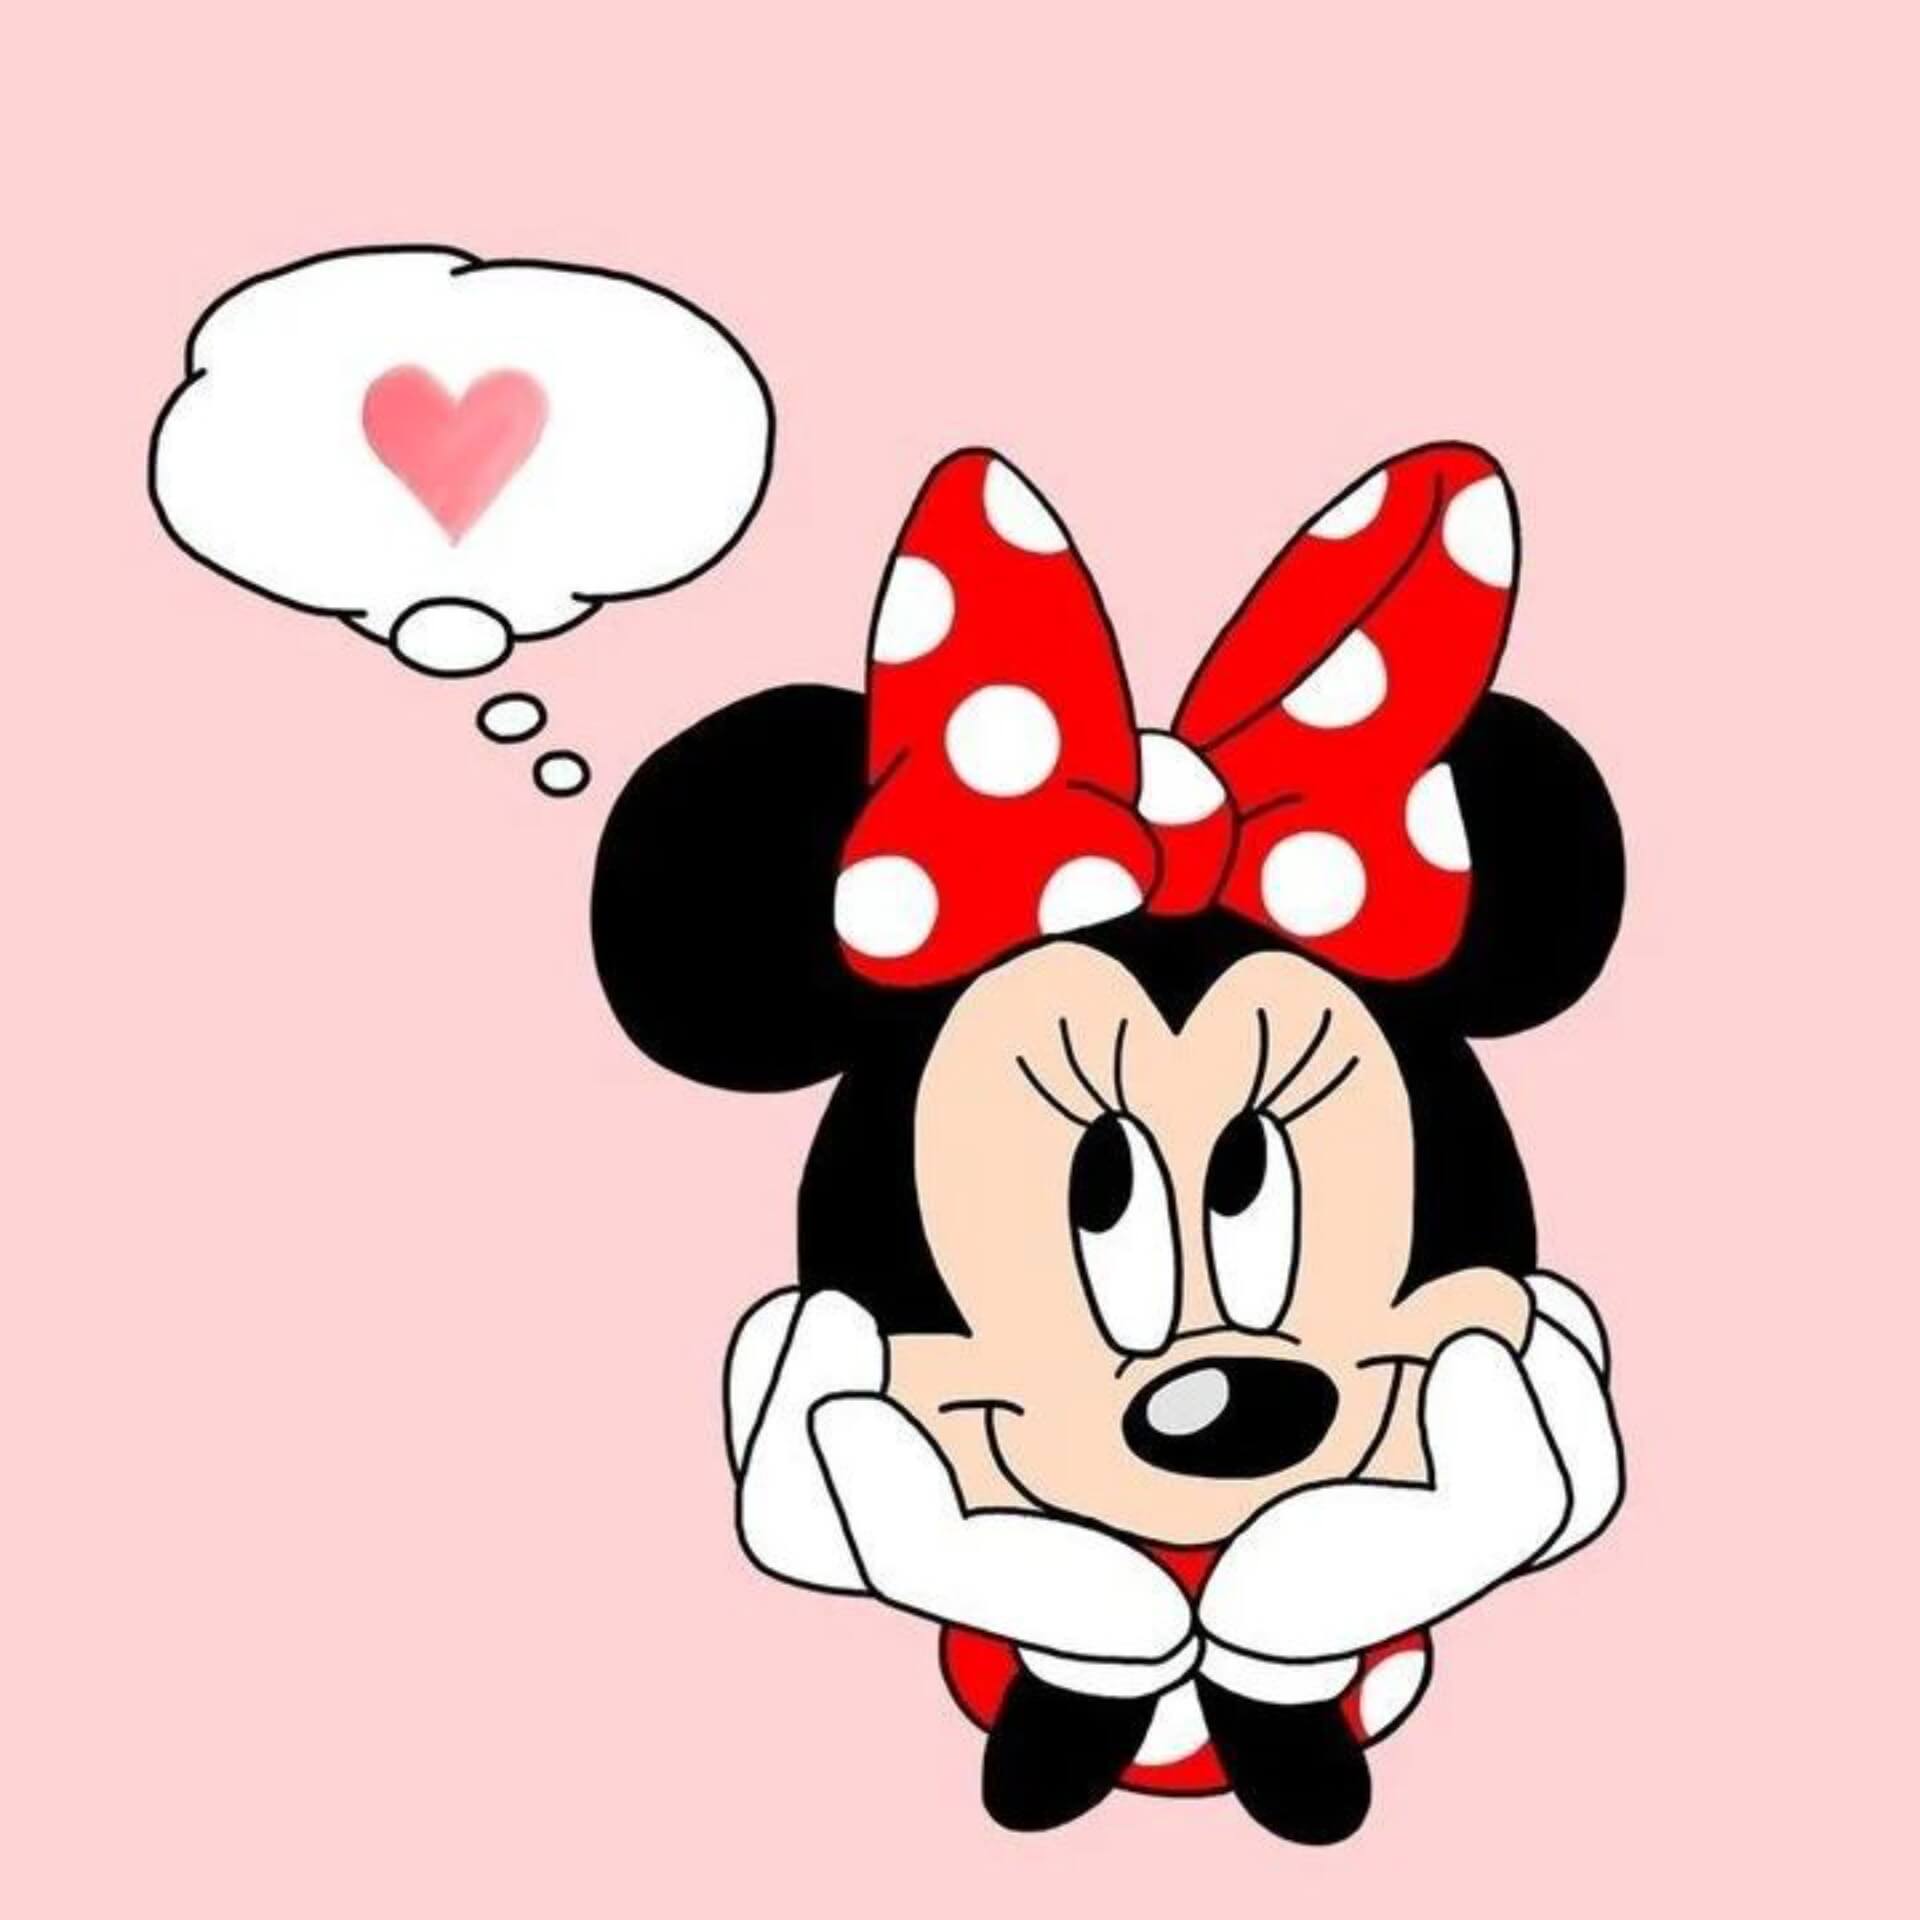 Micky mouse WhatsApp Dp